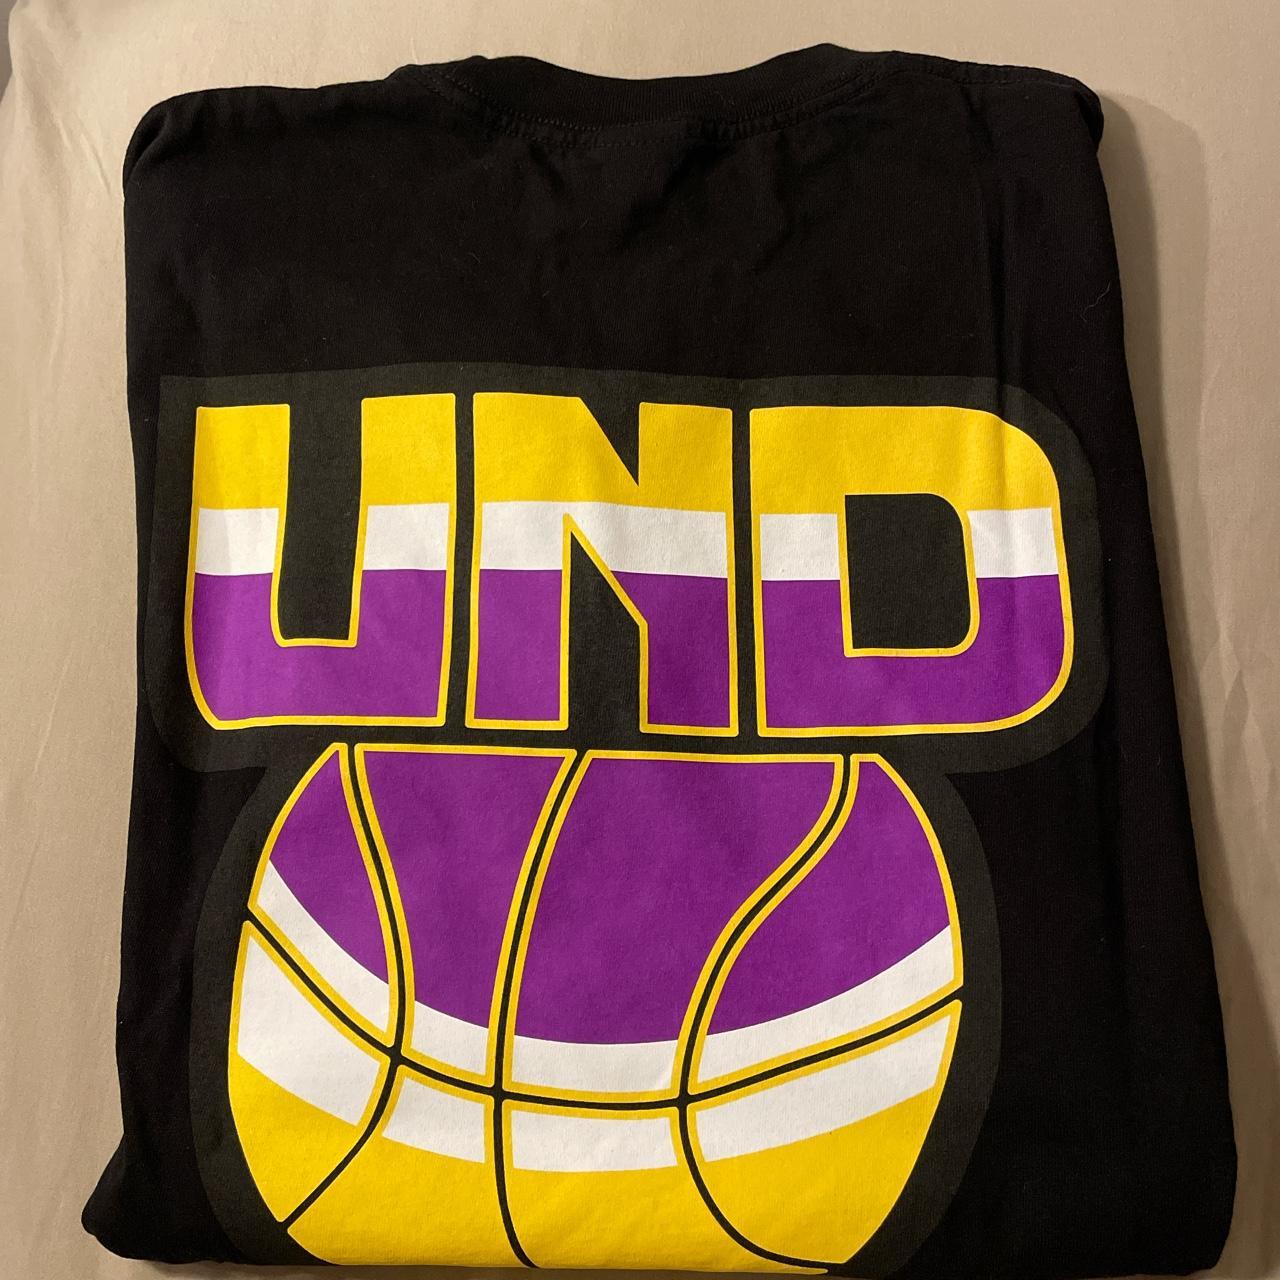 Undefeated Men's Black and Yellow T-shirt (3)